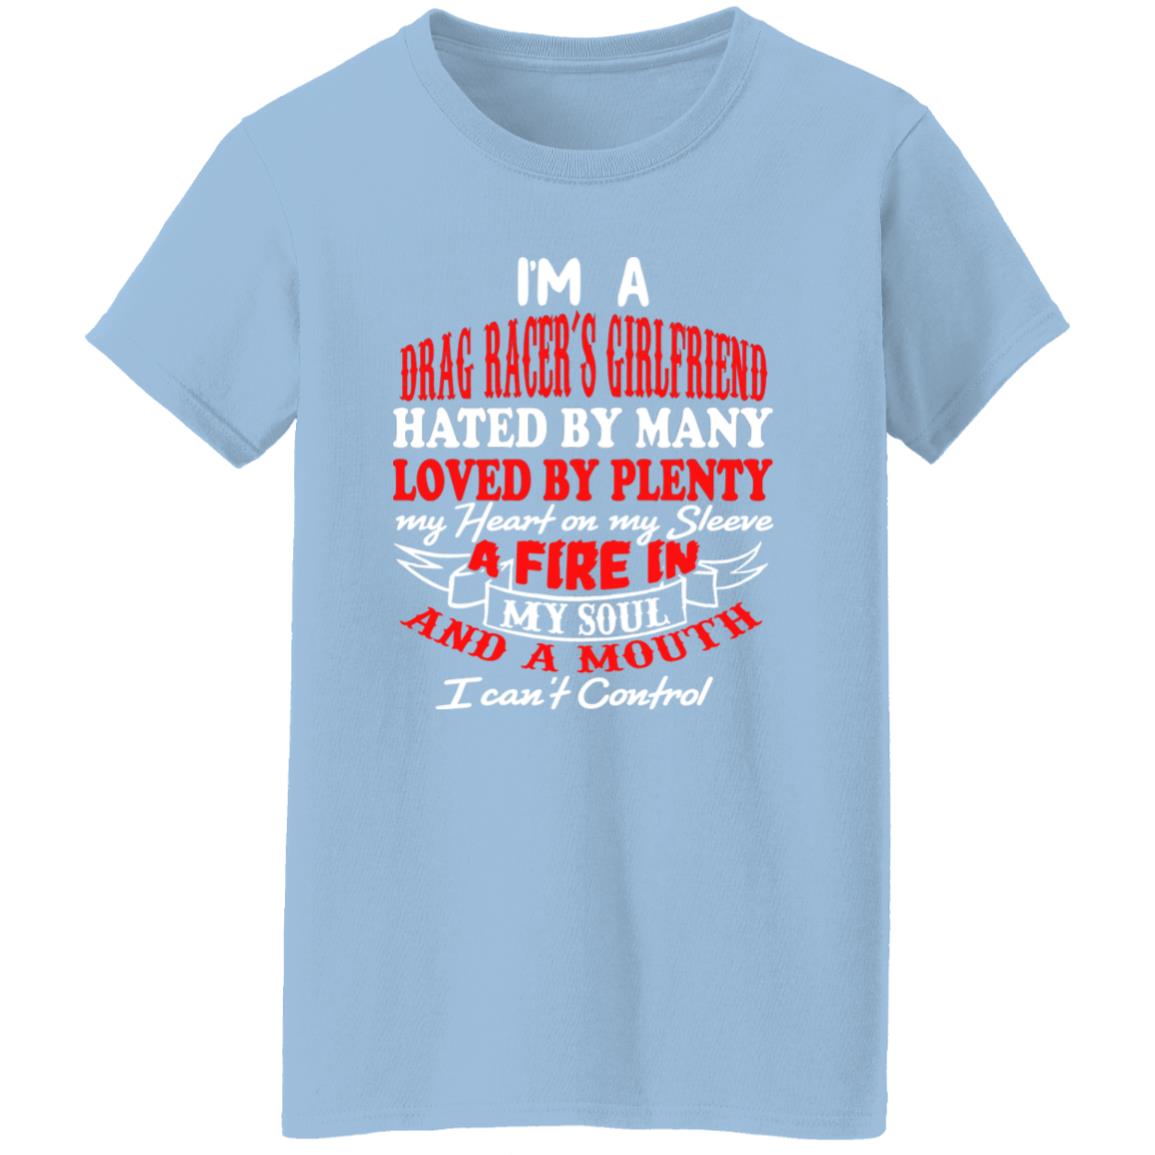 I'm A Drag Racer's Girlfriend Hated By Many Loved By Plenty Ladies' 5.3 oz. T-Shirt